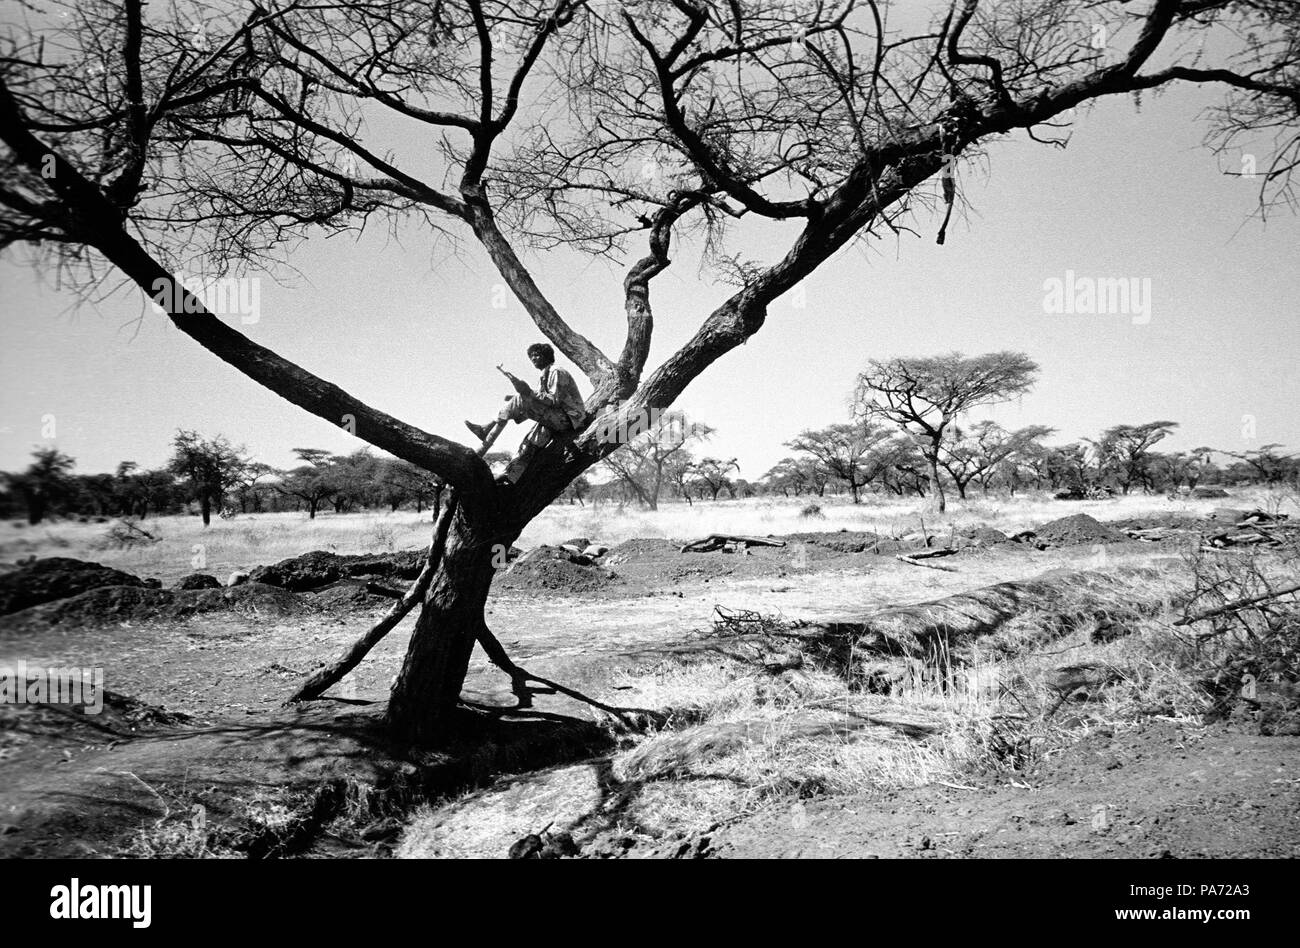 Tserona, Eritrea. 2nd Nov, 1999. In the heat of the day, a lone fighter stands guard in an acacia tree at Egri Mikhal. Beyond the front-line trench, the Eritreans have heavily mined the stretch of land that separates them from the Ethiopian soldiers. Credit: Cheryl Hatch/ZUMAPRESS.com/Alamy Live News Stock Photo